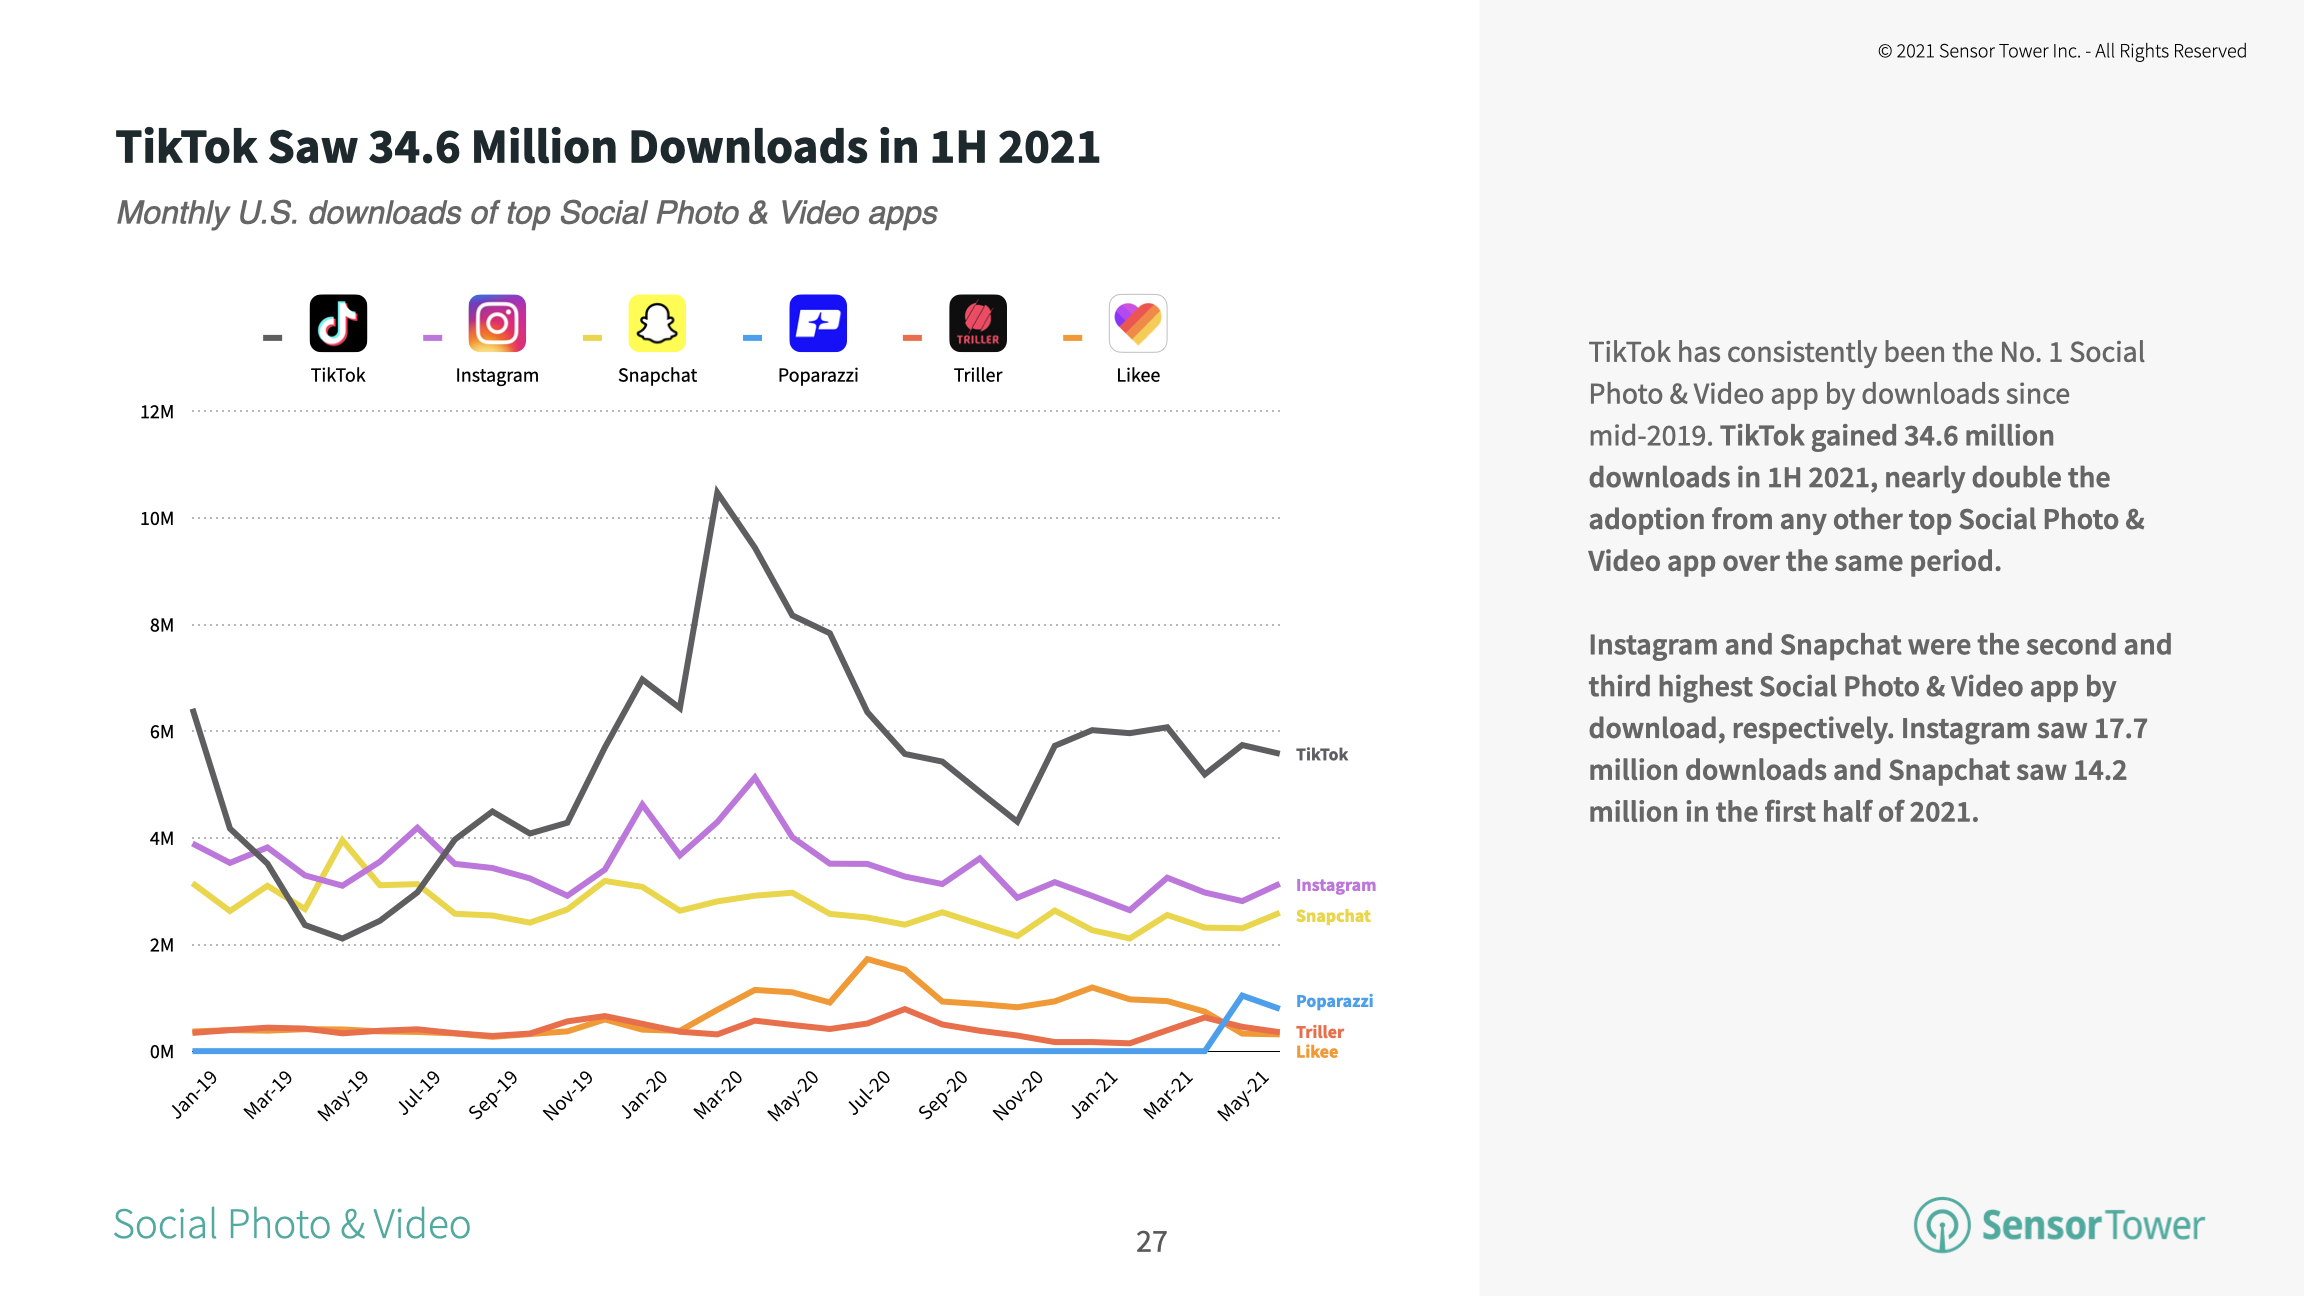 TikTok saw 34.6 million installs in the U.S. in 1H21, nearly double that of other top Social Photo & Video apps